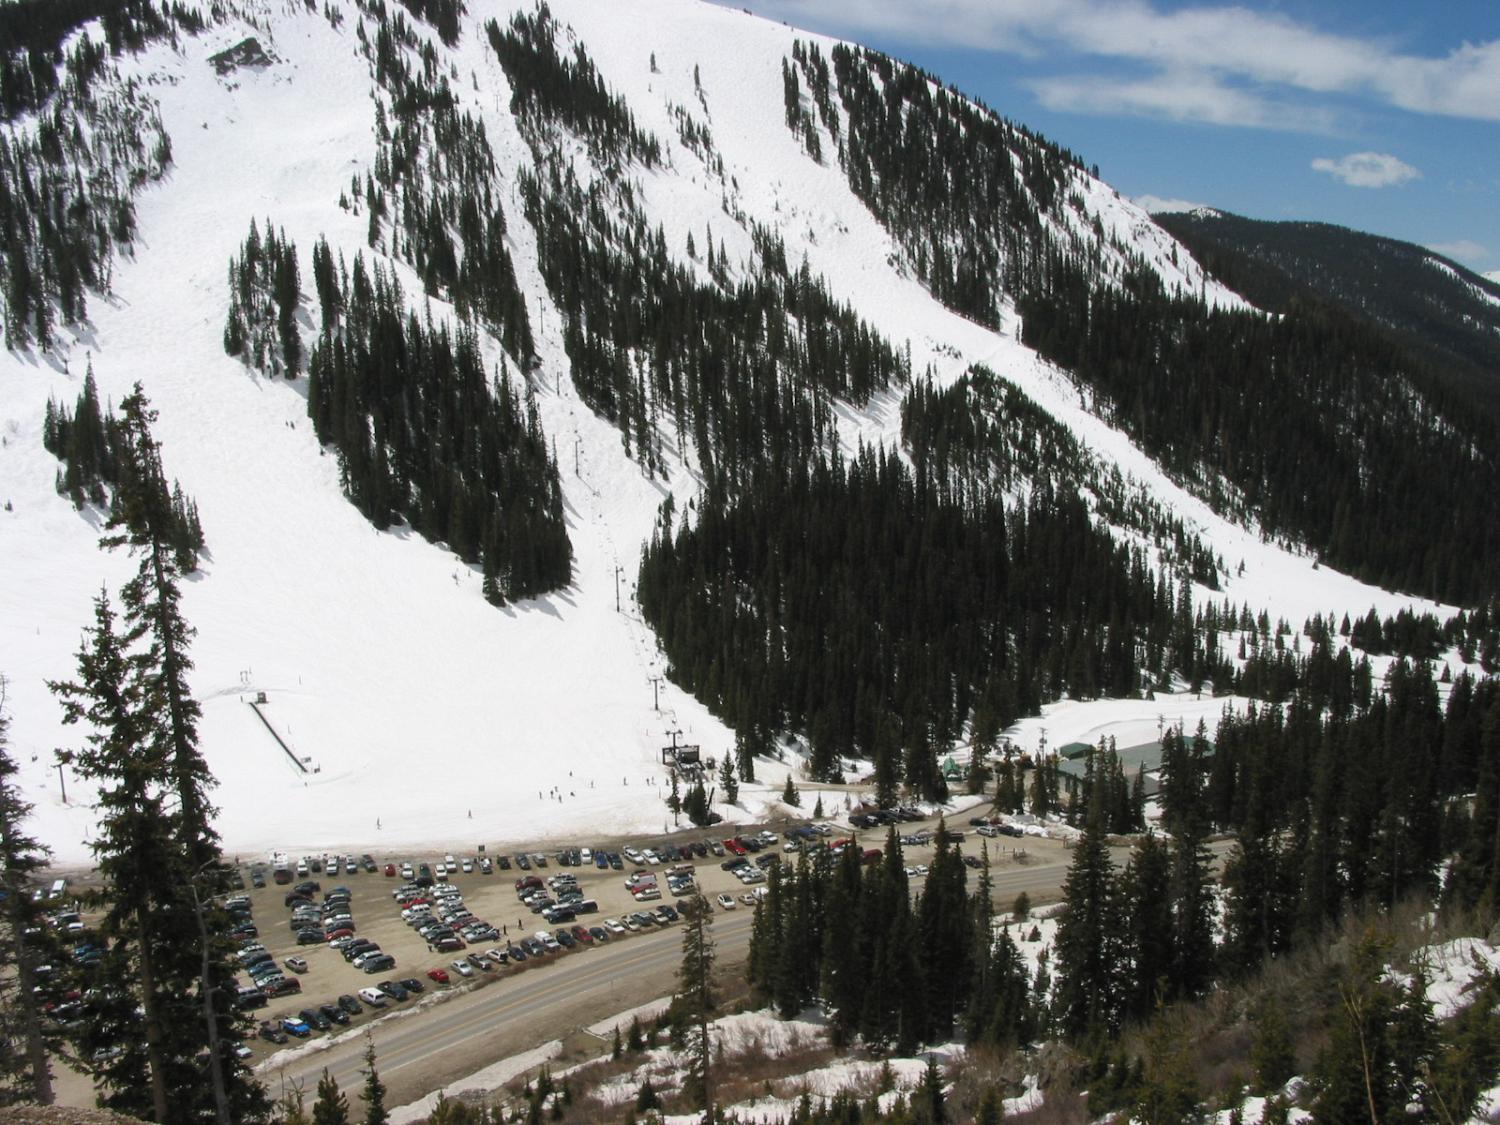 Looking down at the A-Basin Parking Lot and the Pallavicini Lift from the Loveland Pass Road.